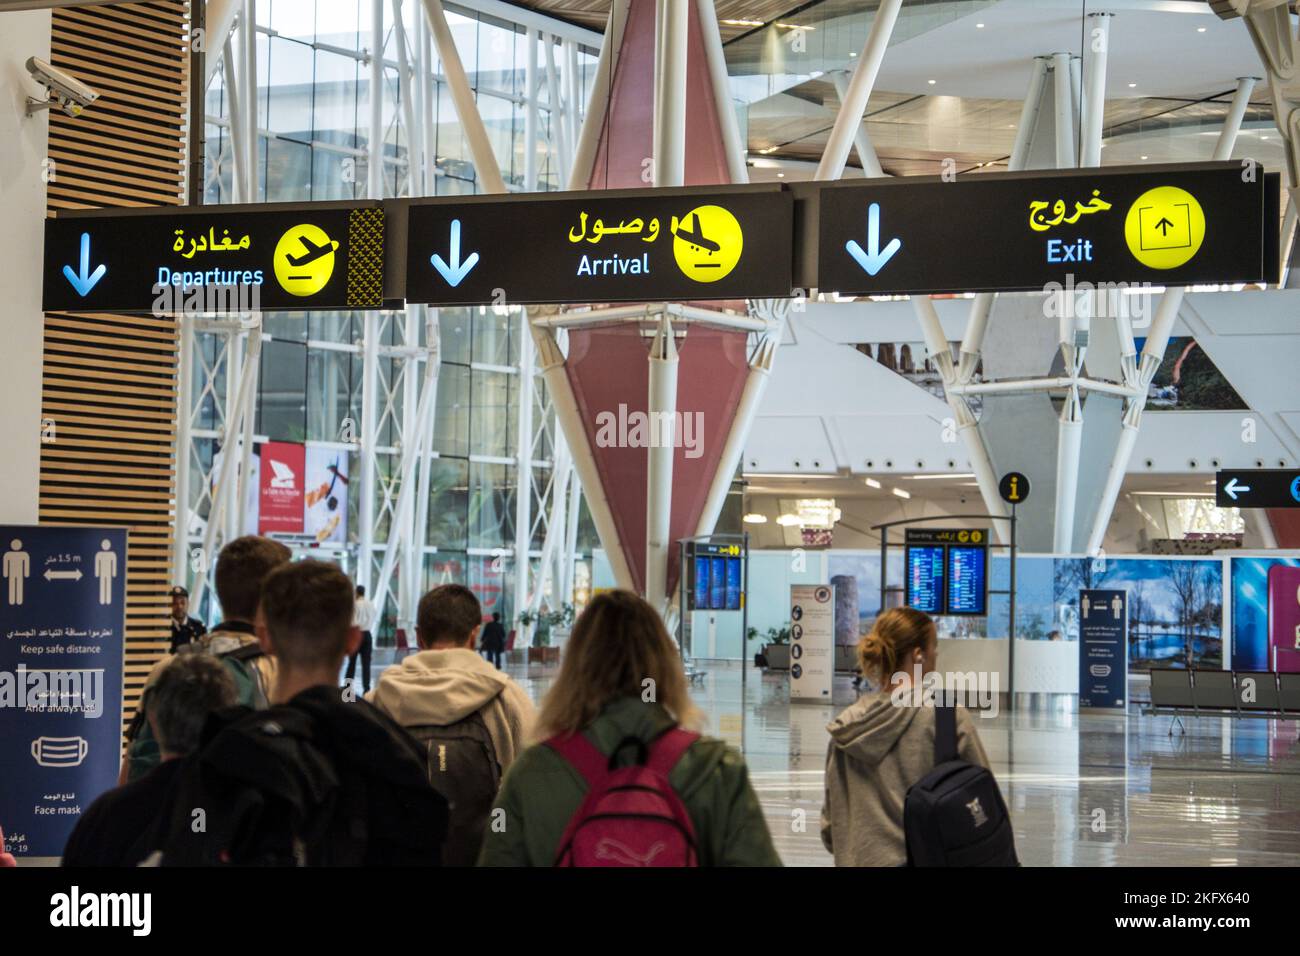 Signage at Marrakech airport, Morocco Stock Photo